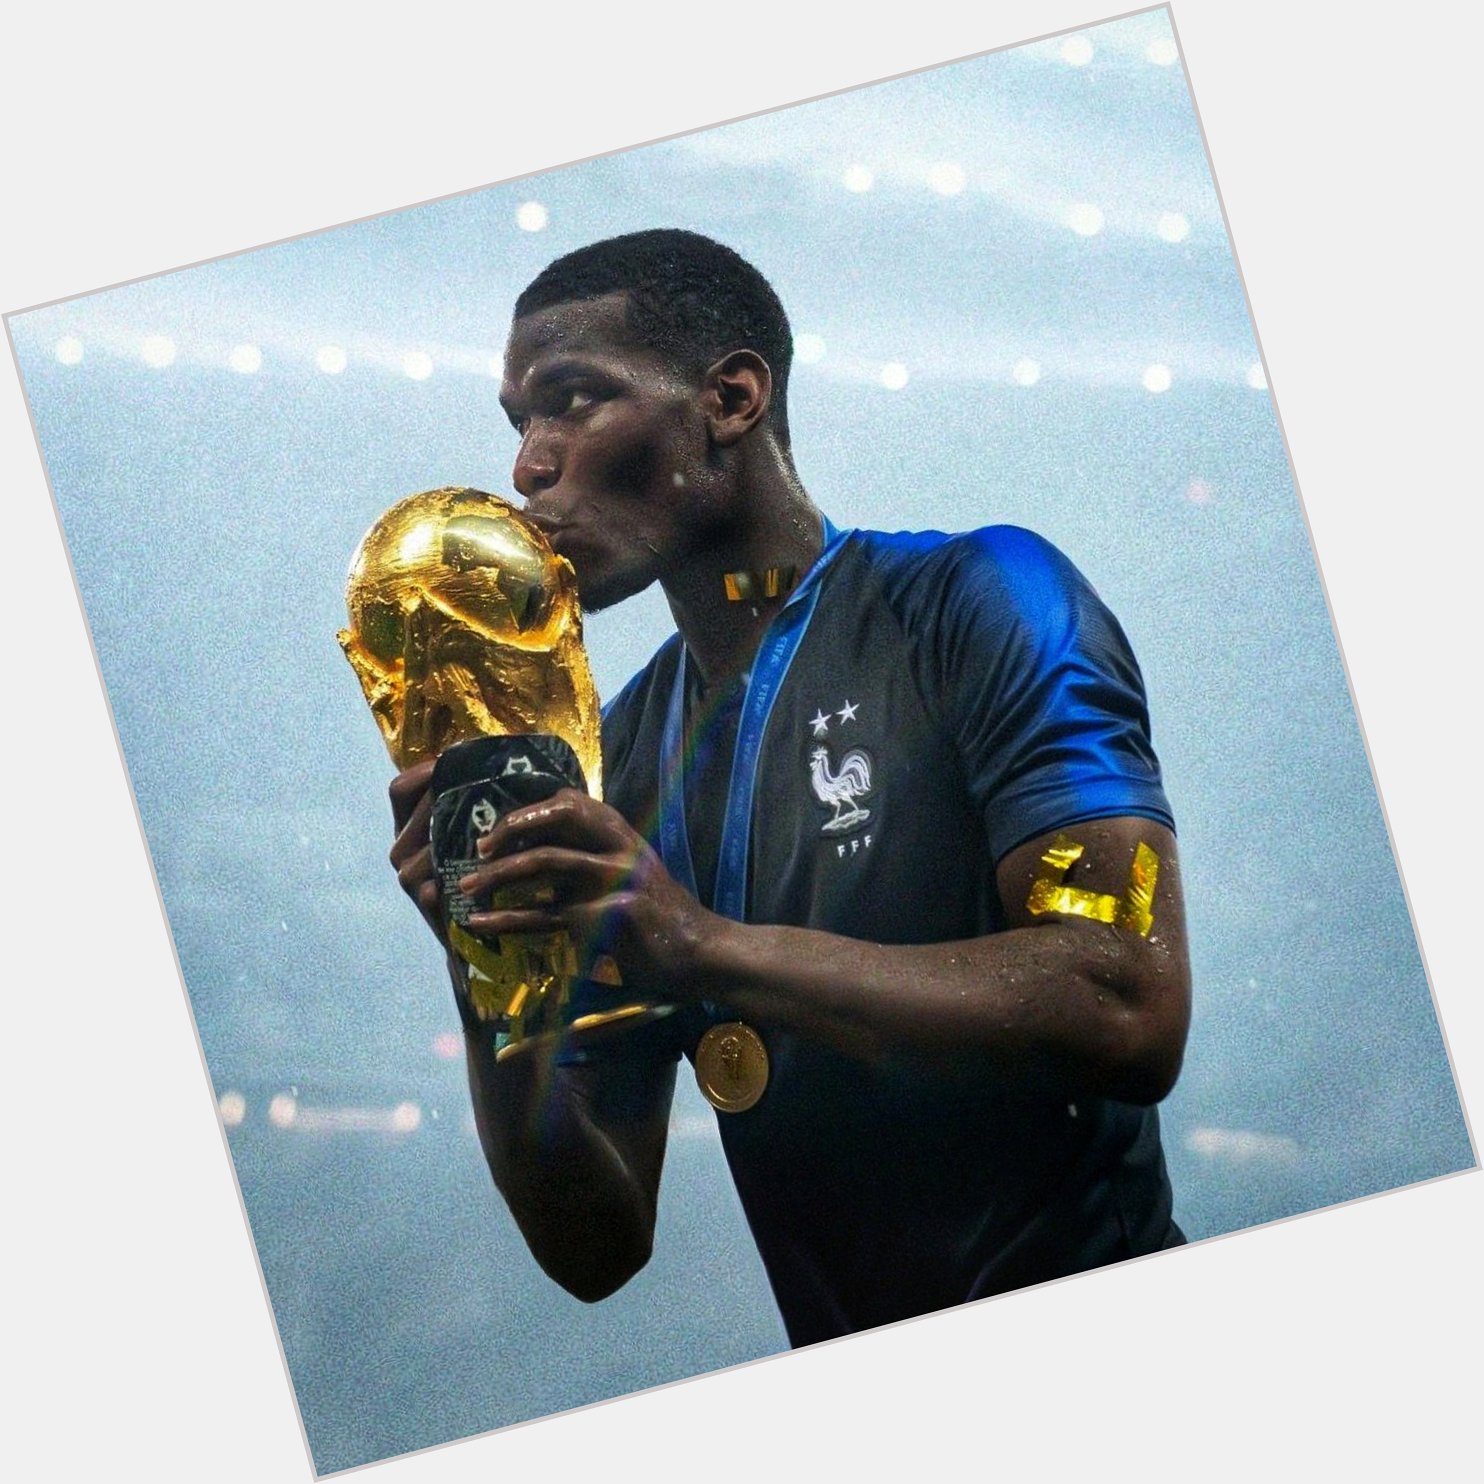 Happy birthday to the king of Manchester paul pogba. Makes me enjoy football have a good day 